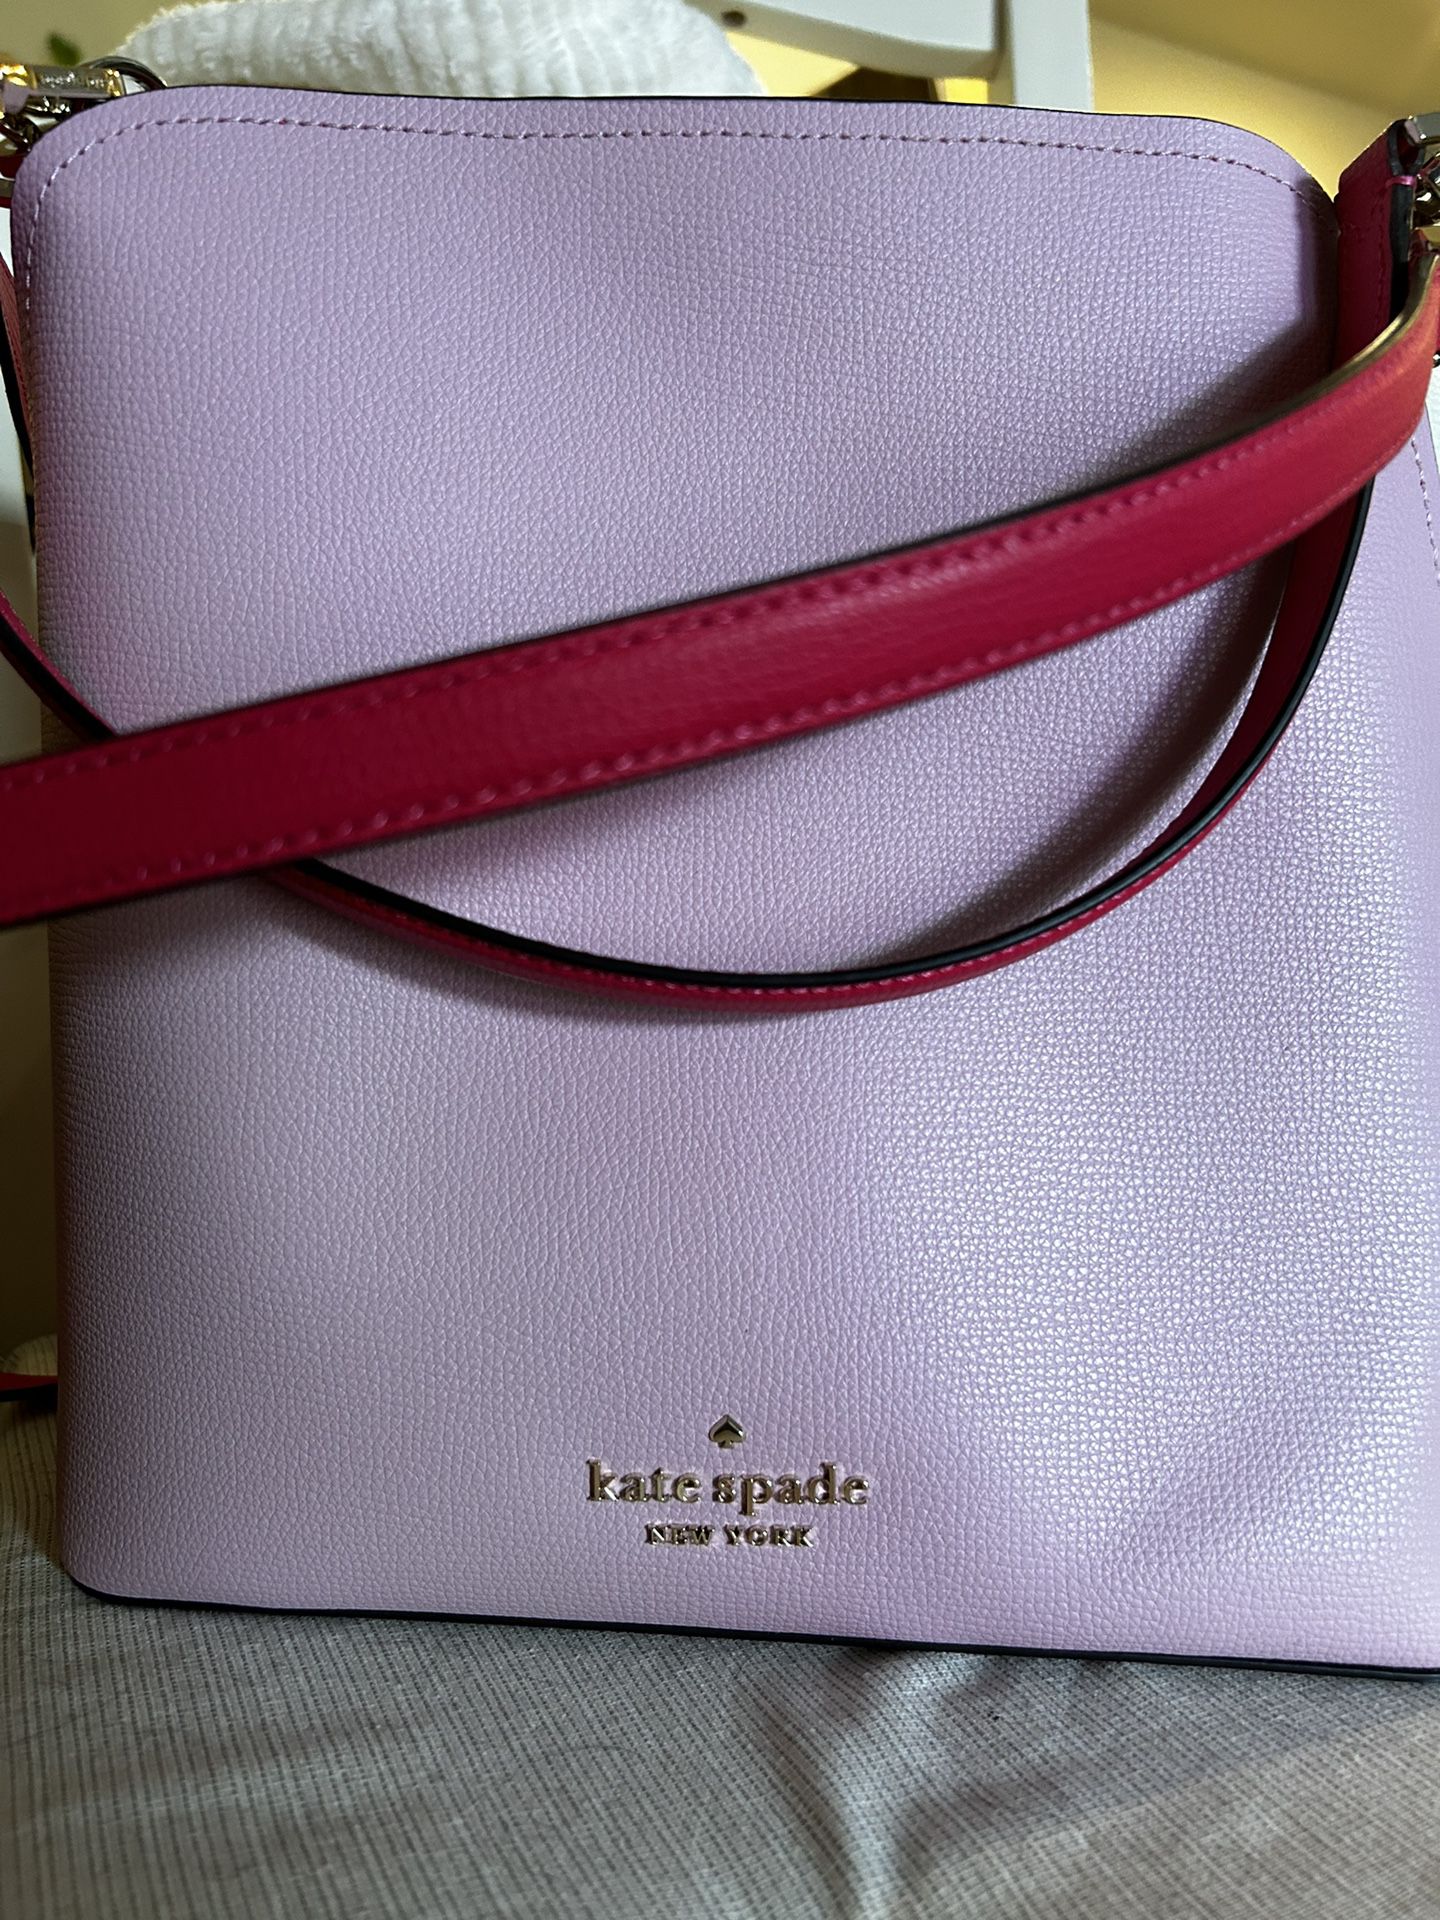 Pink And White Kate Spade Purse